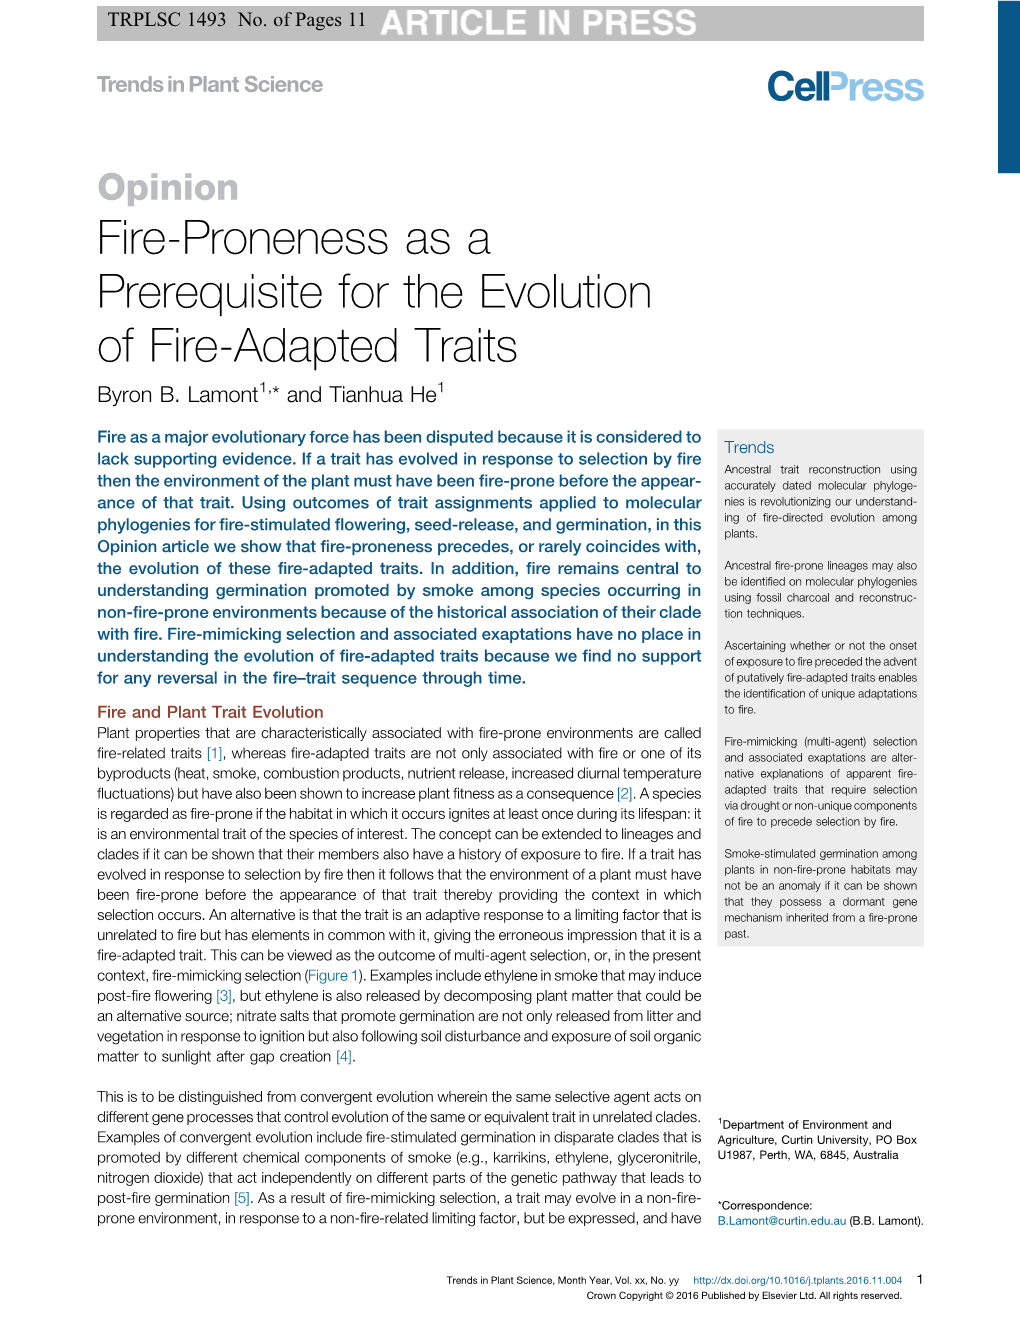 Fire-Proneness As a Prerequisite for the Evolution of Fire-Adapted Traits